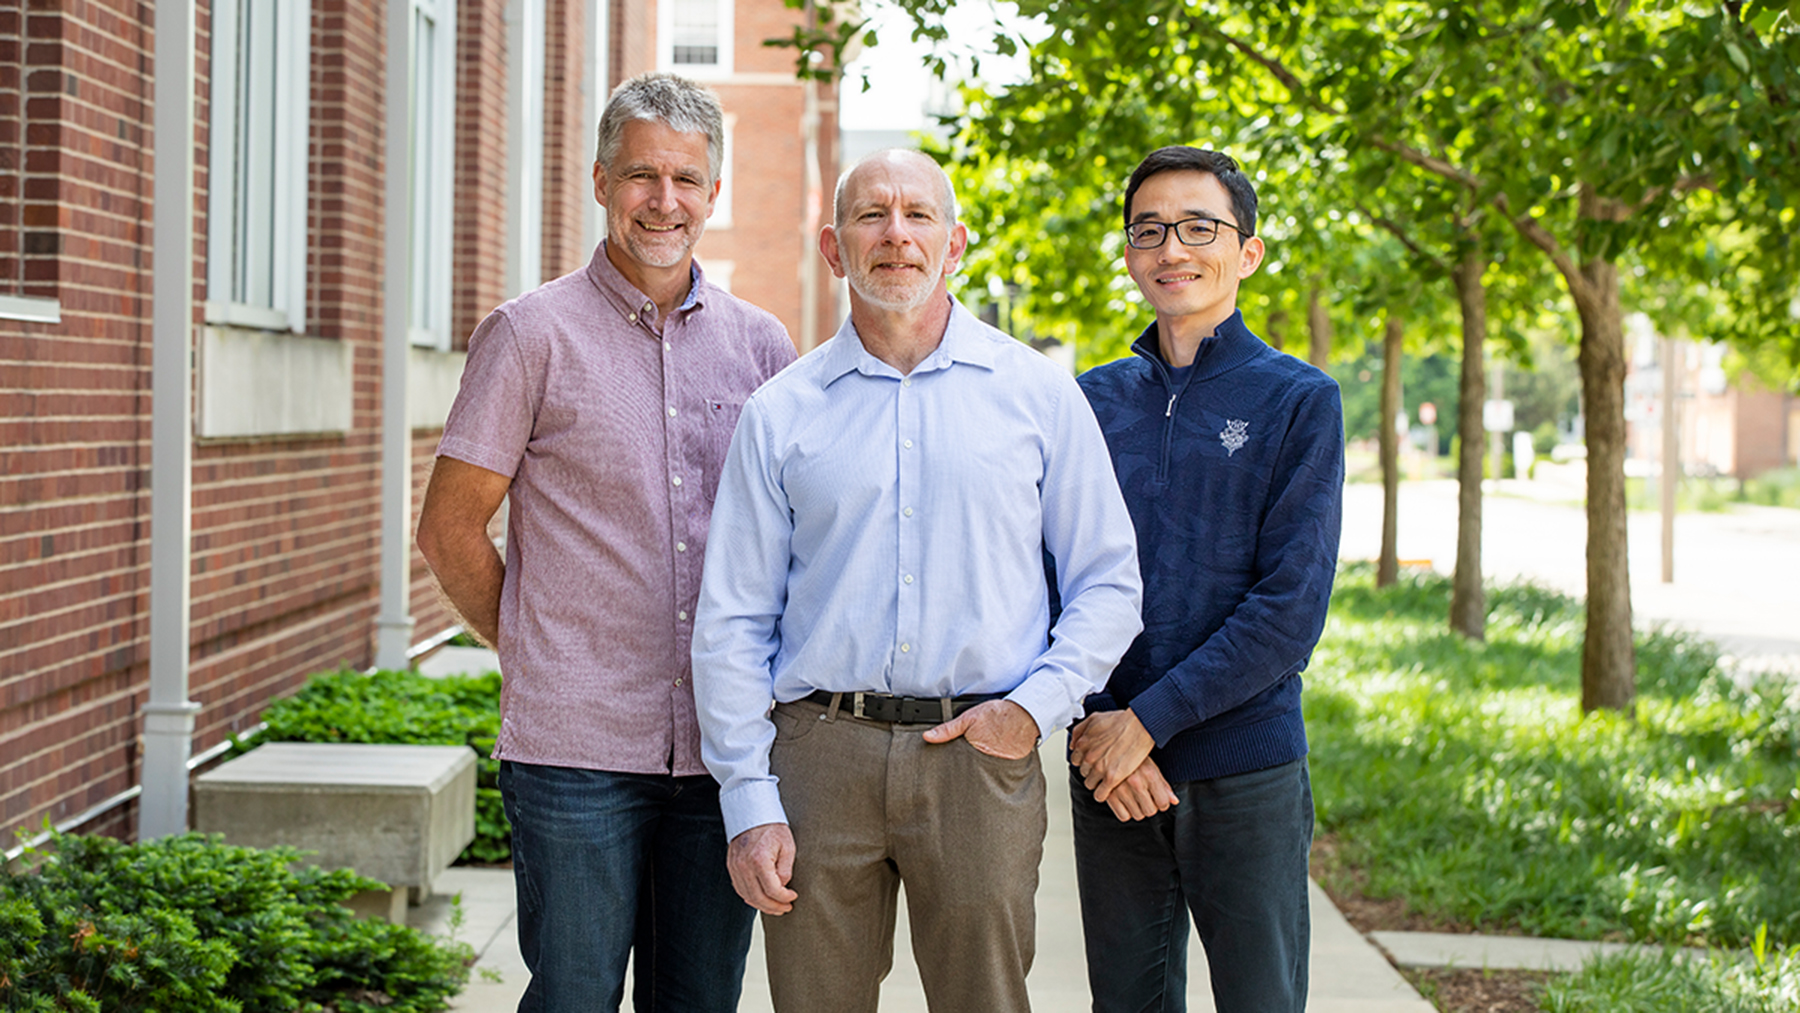 Jon Welty Peachey, Jules Woolf and Mikihiro Sato, all professors of recreation, sport and tourism at the University of Illinois Urbana-Champaign. Photo by Michelle Hassel